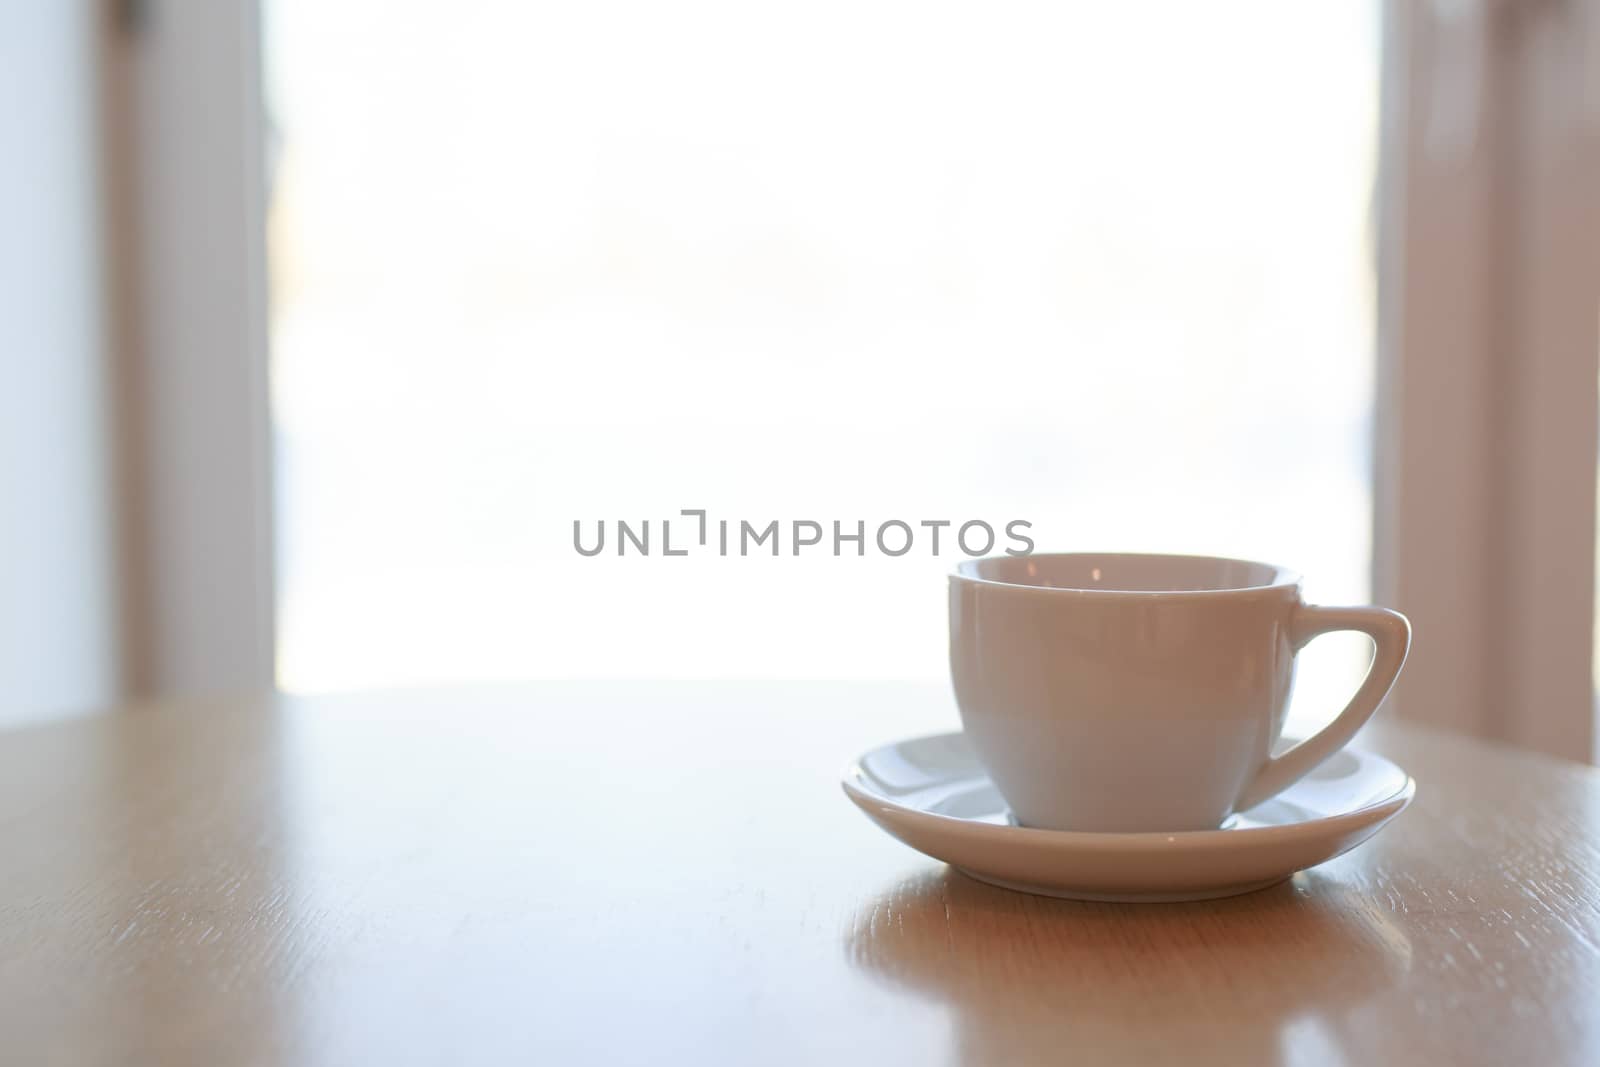 one pure white ceramic Cup and saucer without drink sits on a wooden table in the afternoon sunlight